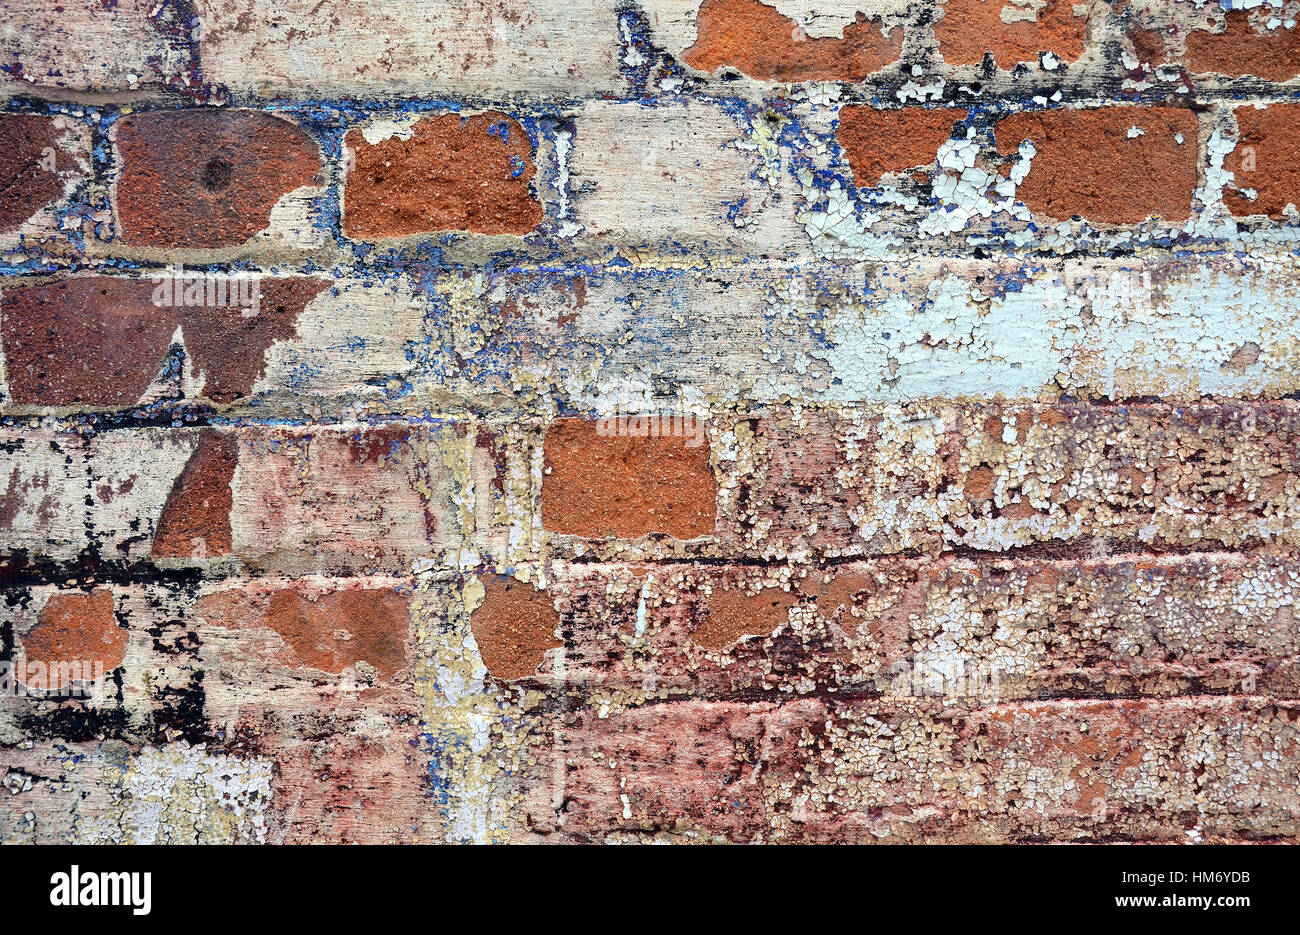 Old cracked rendered wall from historic building with exposed brick and mortar and peeling paint. Grunge texture background Stock Photo